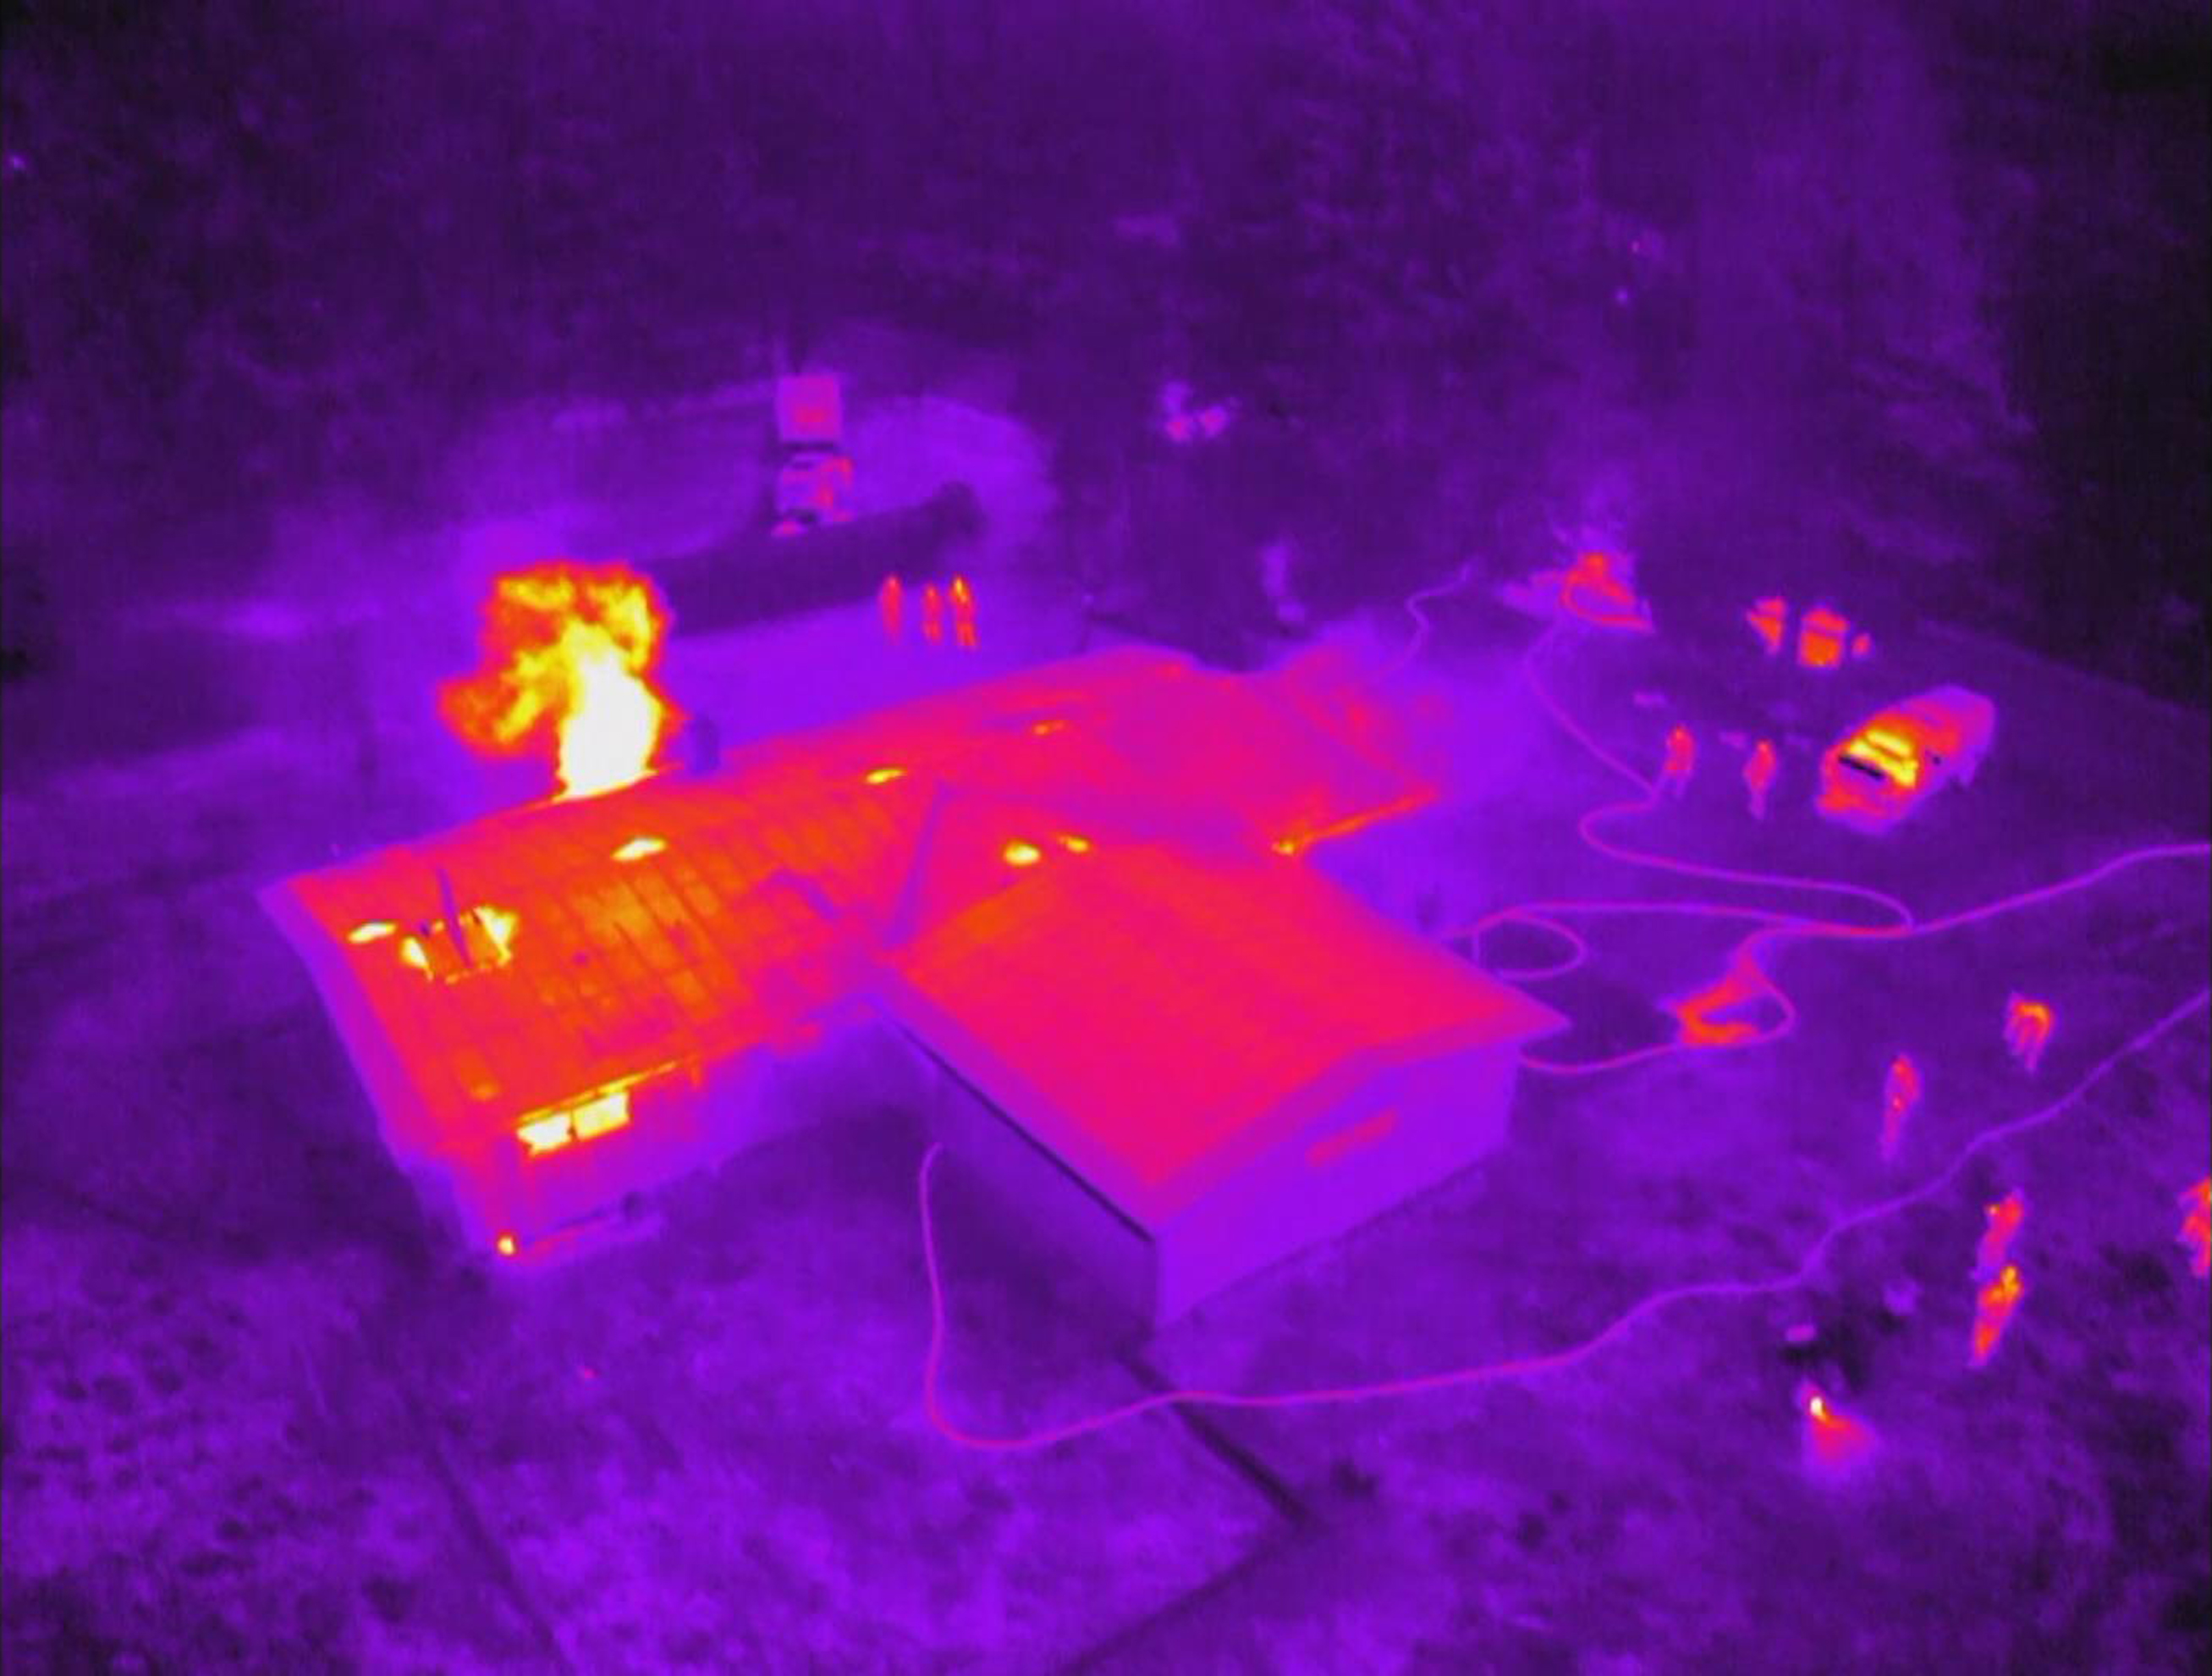 Thermal imagery of building